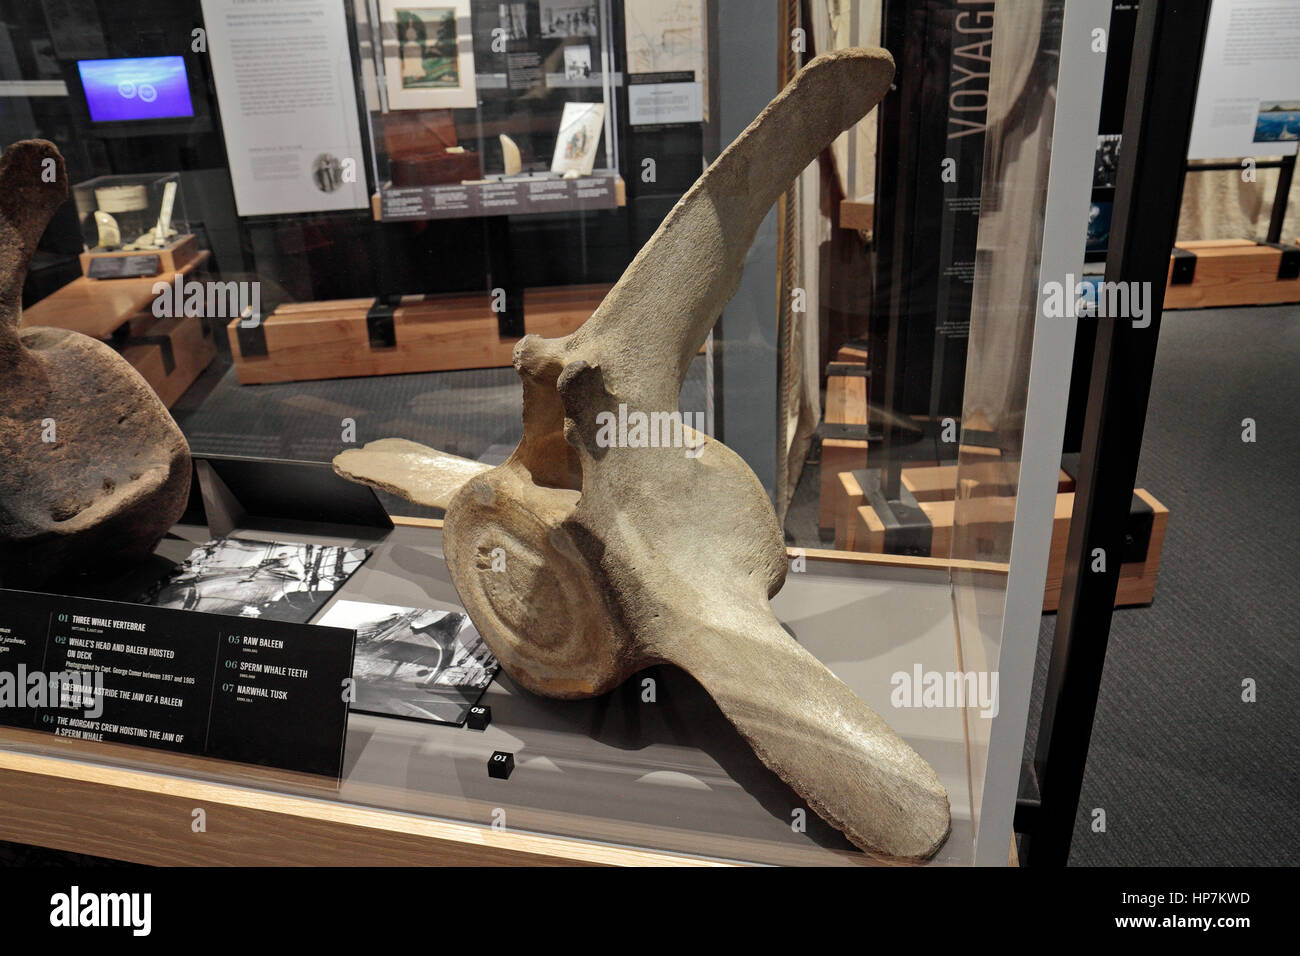 Whale vertebrae on display in the Stillman Building Whalers exhibition, Mystic Seaport, Mystic, Connecticut, United States. Stock Photo